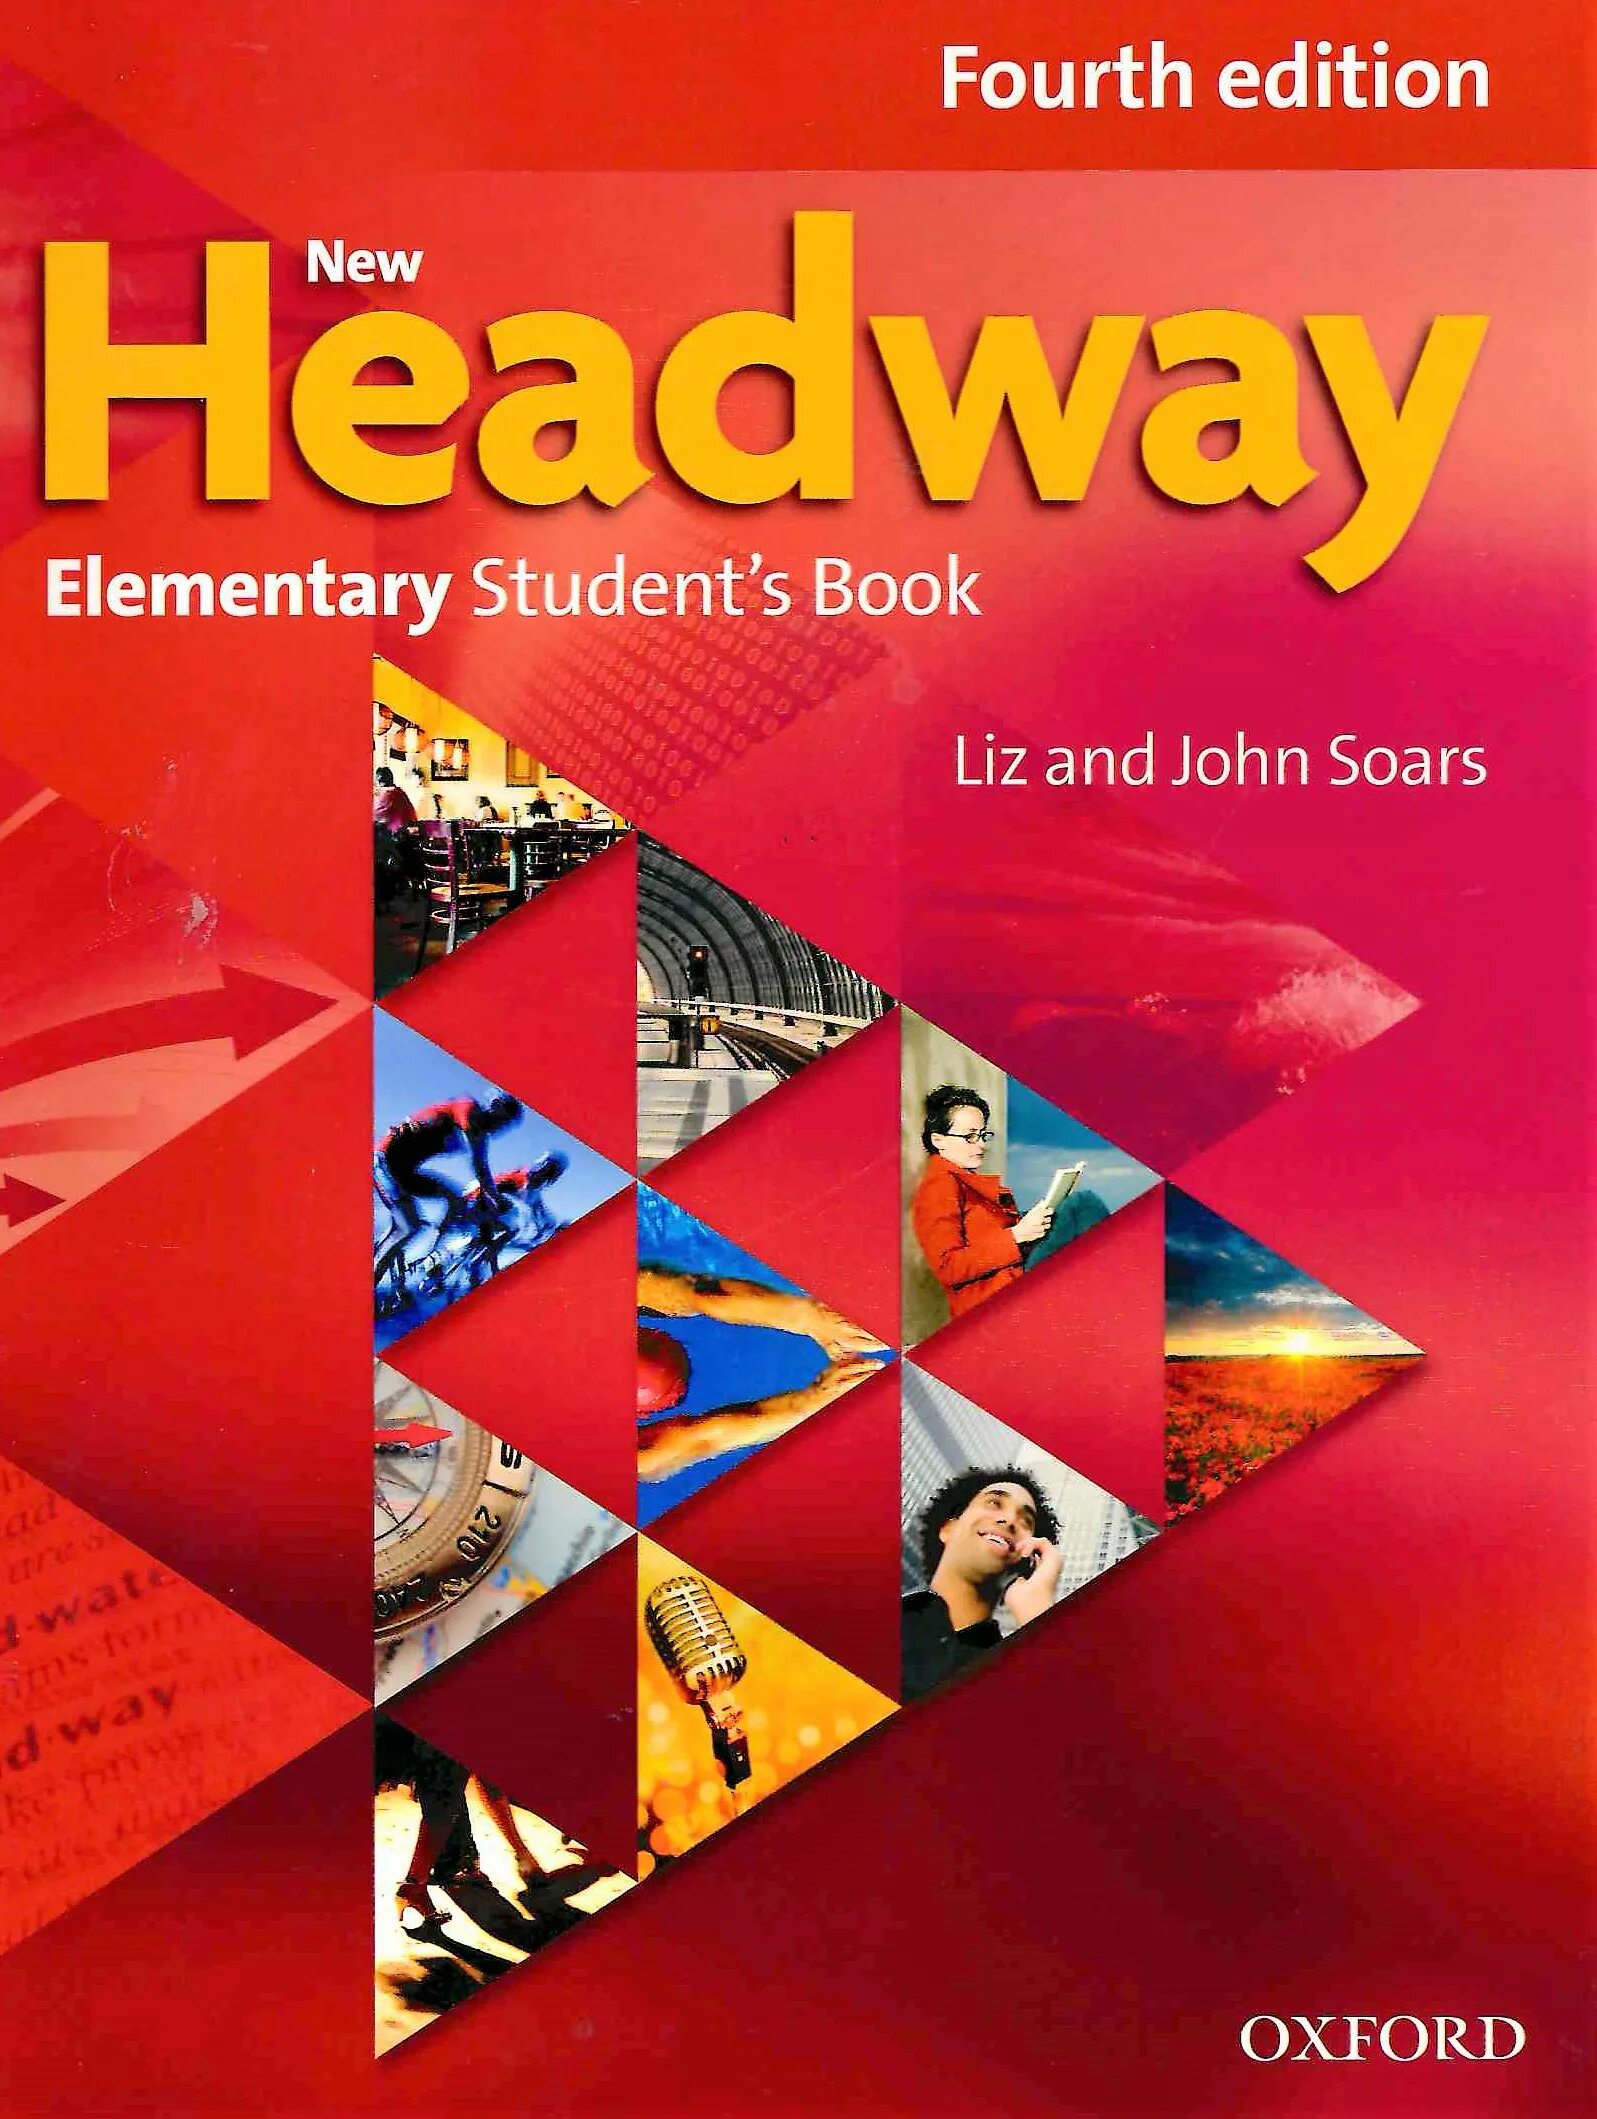 New elementary student s book. New Headway Elementary 3rd Edition. New Headway Beginner 4th Edition. New Headway Elementary Audio 4th Edition. Headway Elementary 4th Edition.